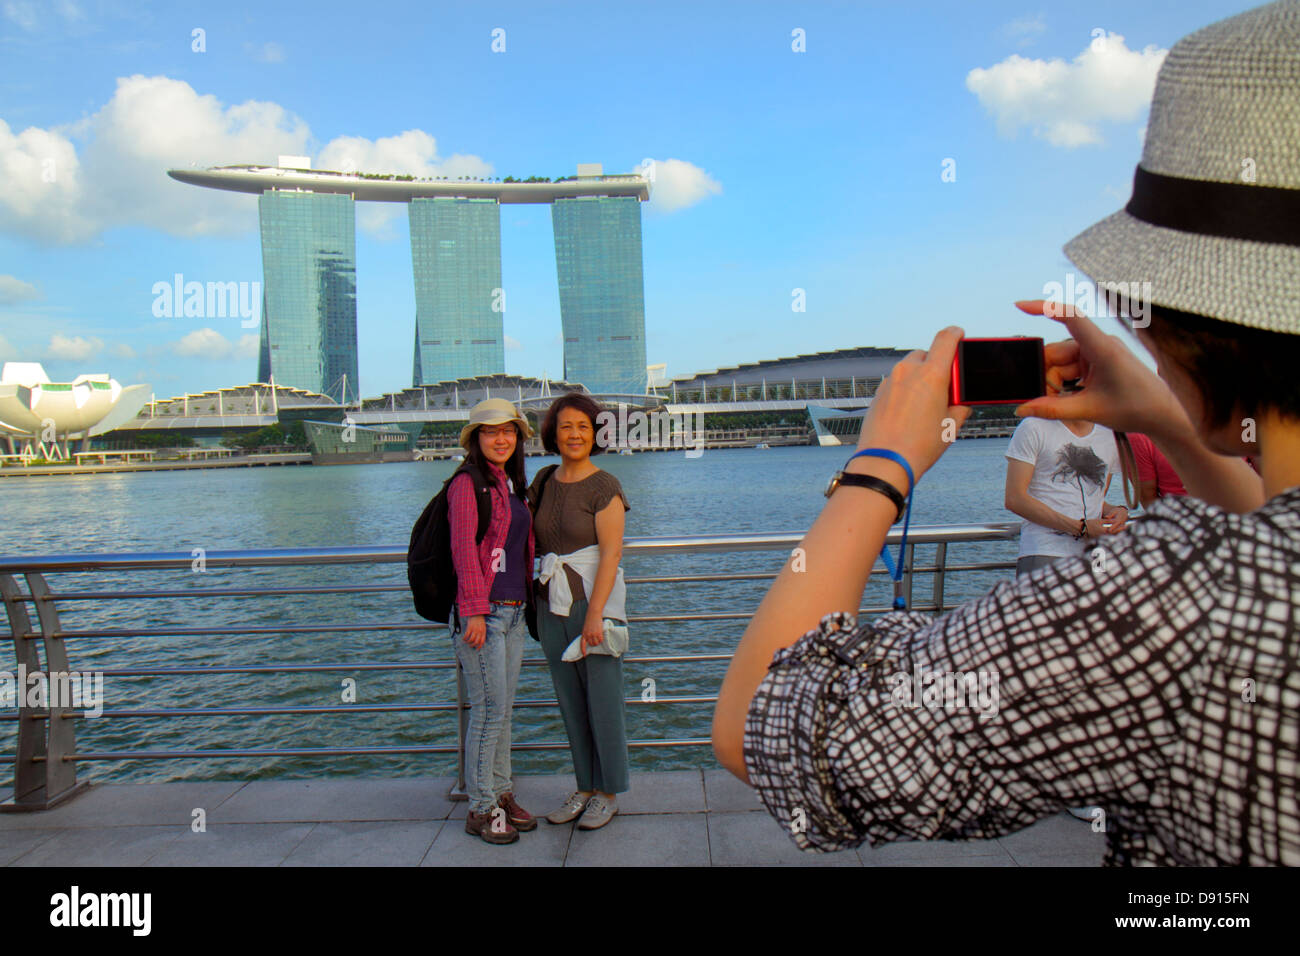 Singapore,Singapore River water,Marina Bay water,Merlion Park,Asian Asians ethnic immigrant immigrants minority,adult adults woman women female lady,p Stock Photo